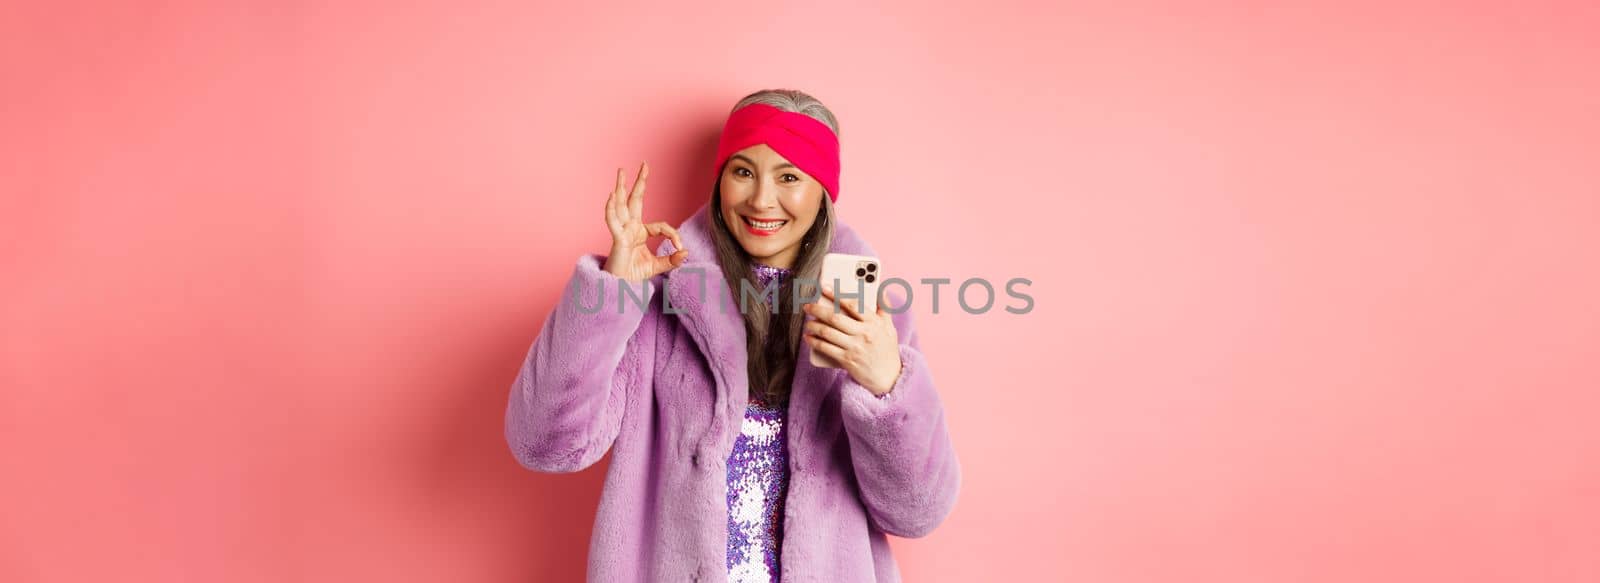 Online shopping and fashion concept. Stylish asian senior woman showing okay sign and holding mobile phone, recommending internet store, pink background.